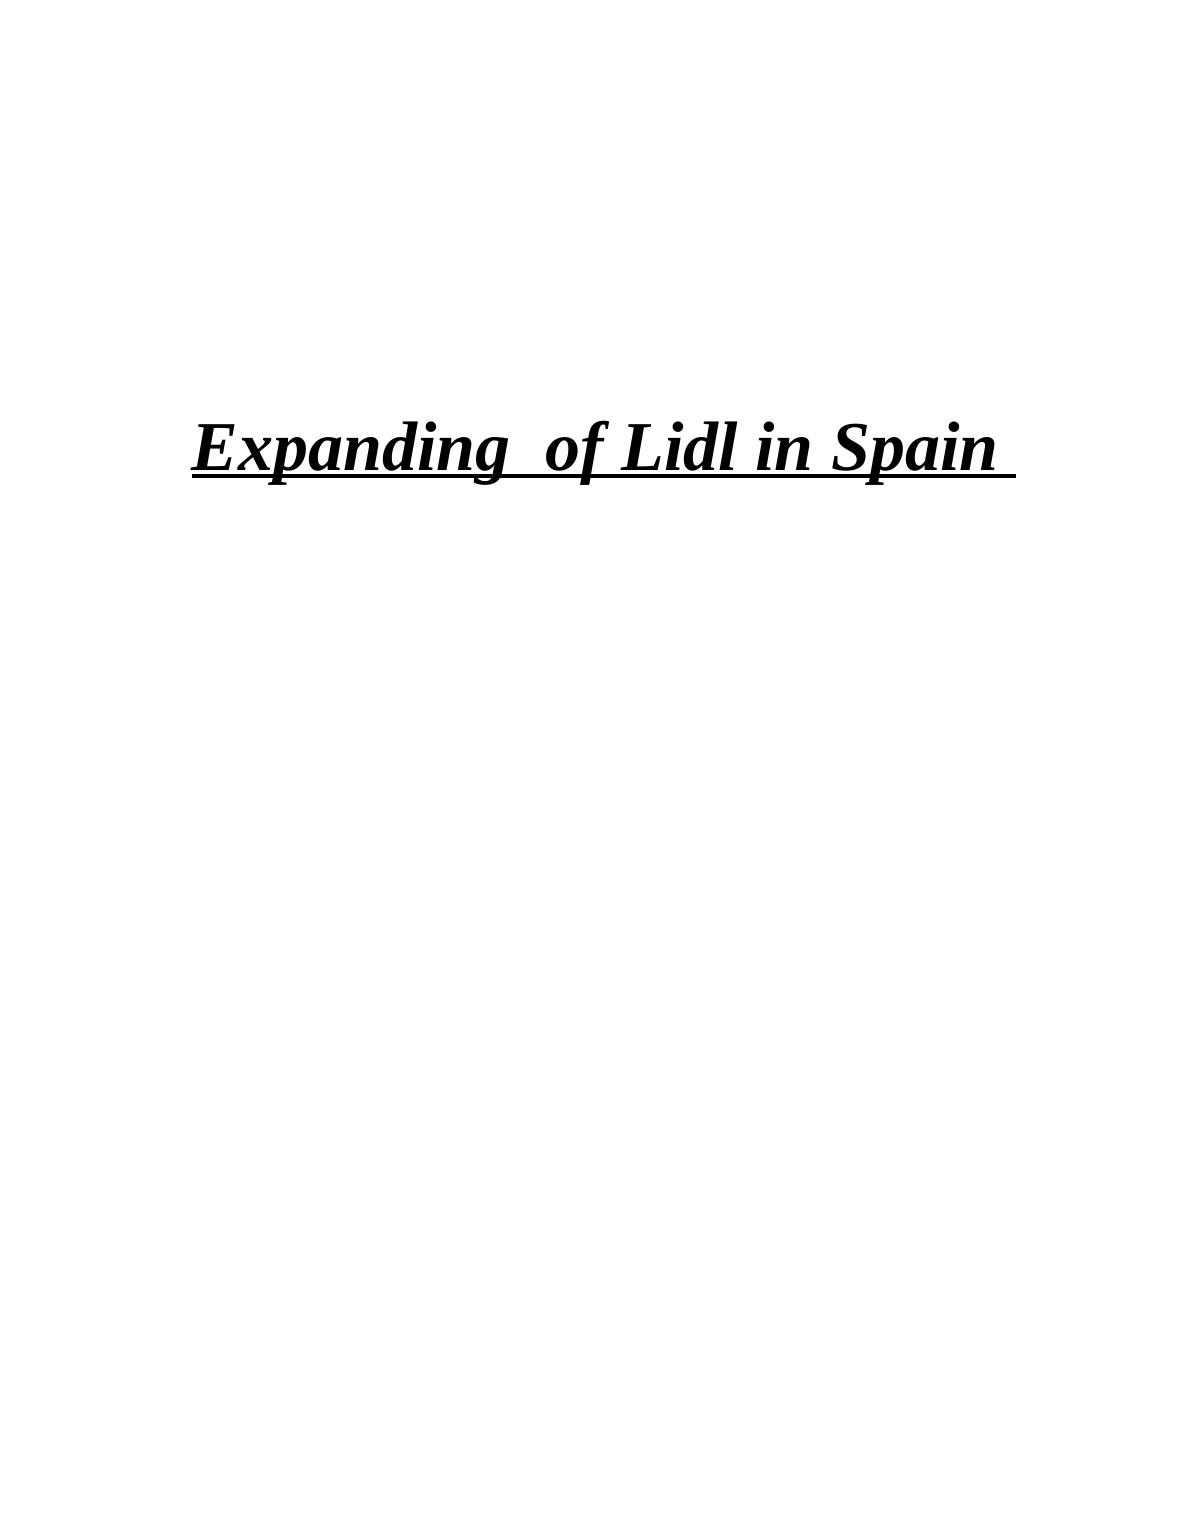 Expanding of Lidl in Spain - Doc_1